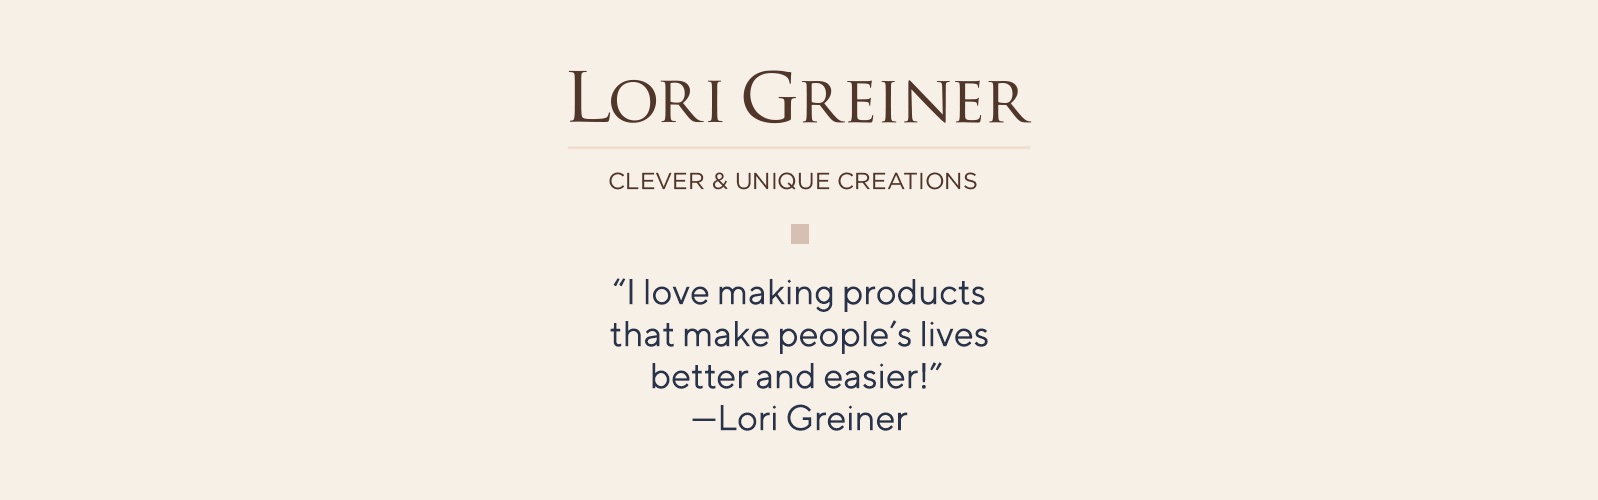 Lori Greiner Clever & Unique Creations -"I love making products that make people's lives better and easier!"  —Lori Greiner